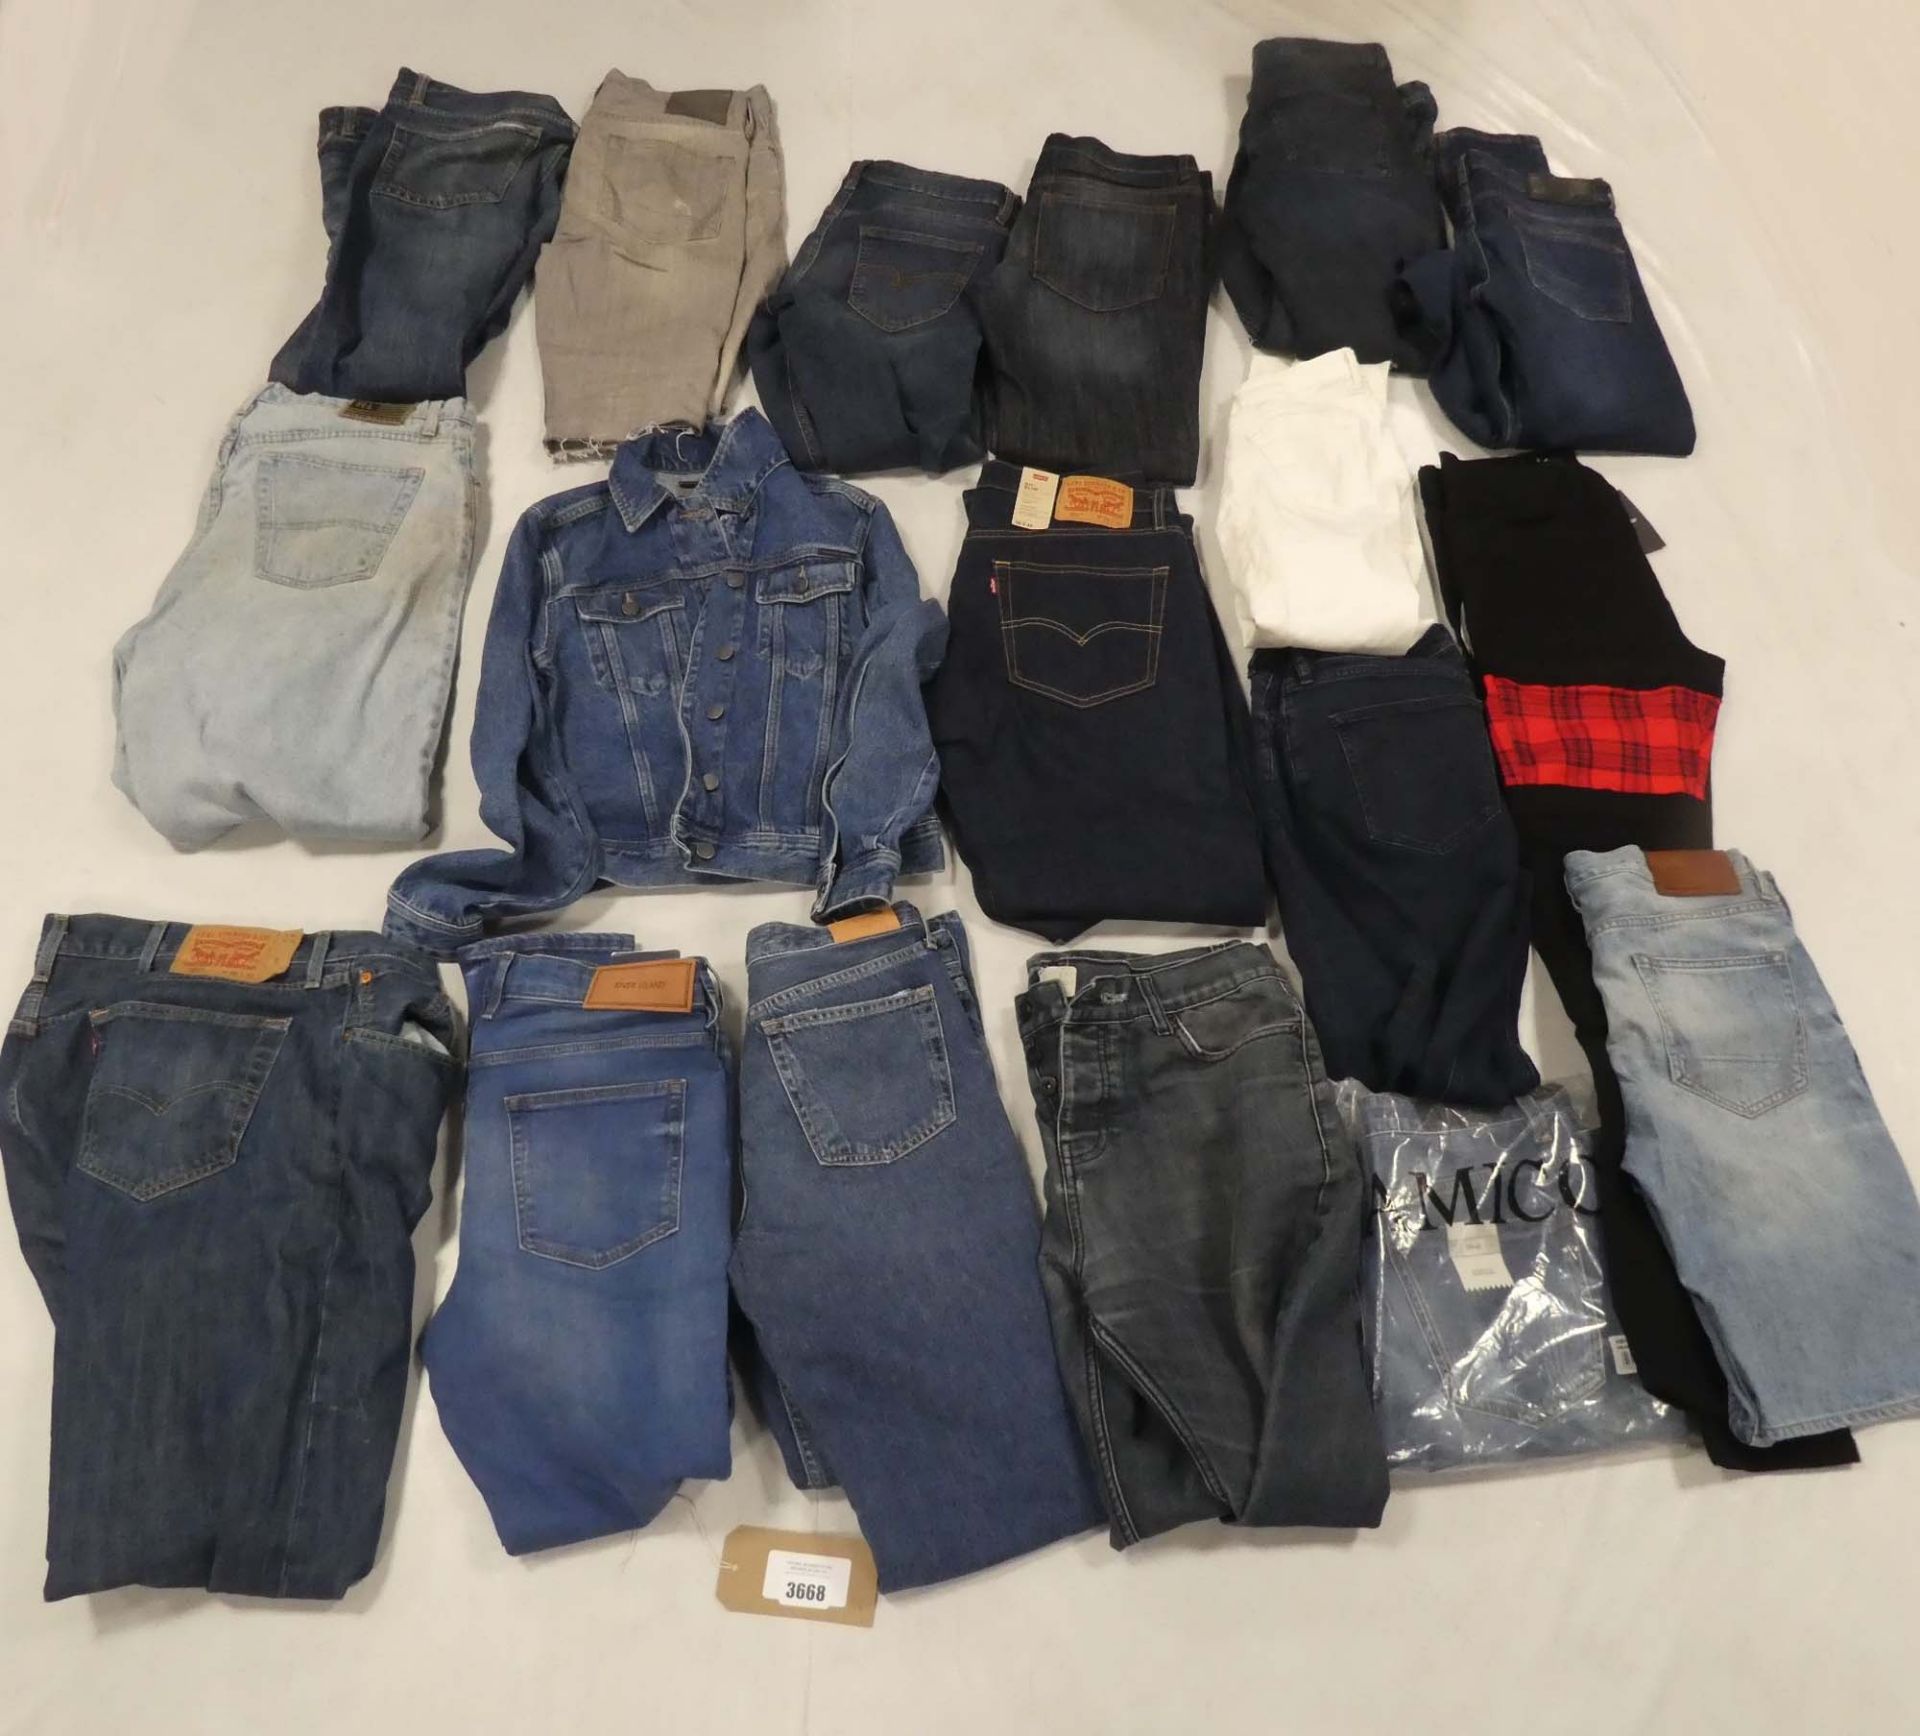 Bag containing new and used denimwear, including Levi's, River Island, Ralph Lauren, Calvin Klein,